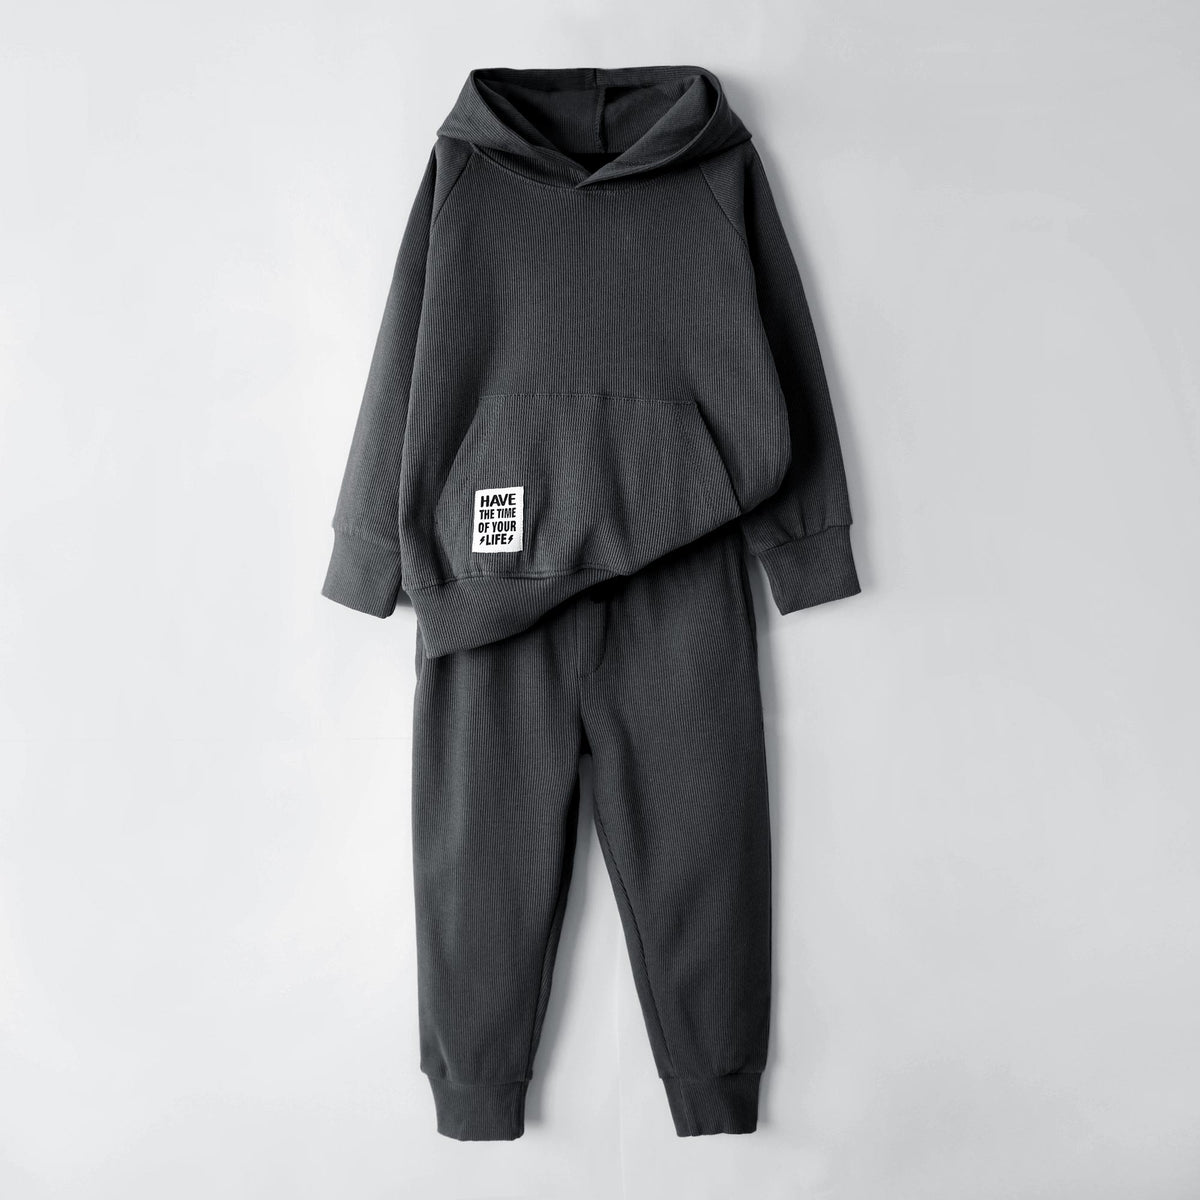 Premium Quality 2 Piece Charcoal Tracksuit For Kids